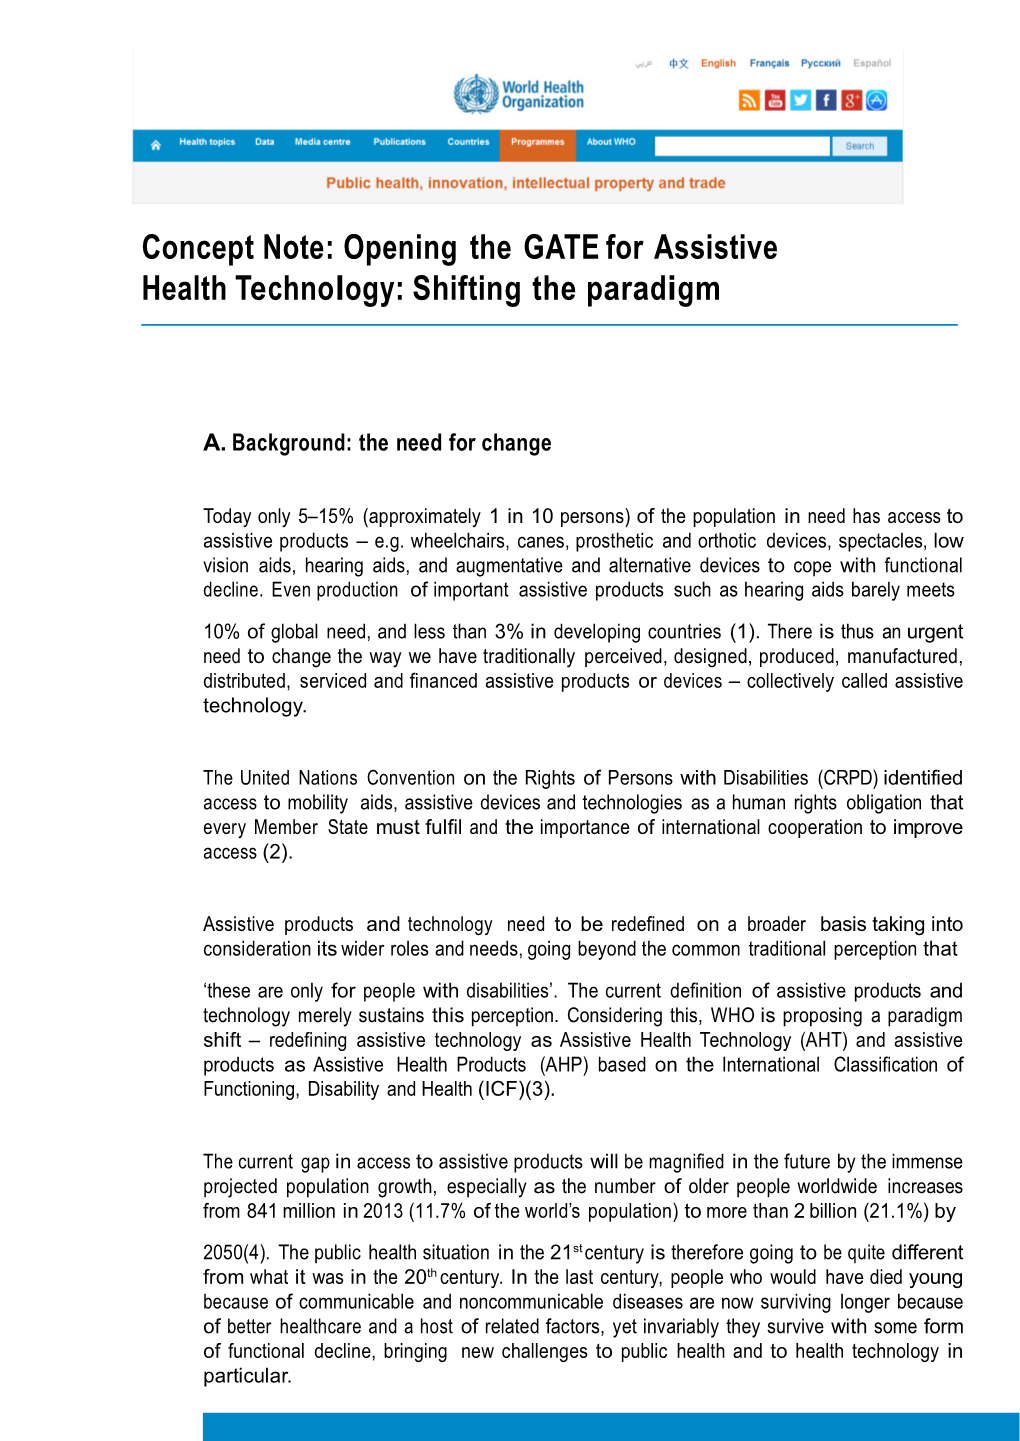 Concept Note: Opening the GATE for Assistive Health Technology: Shifting the Paradigm